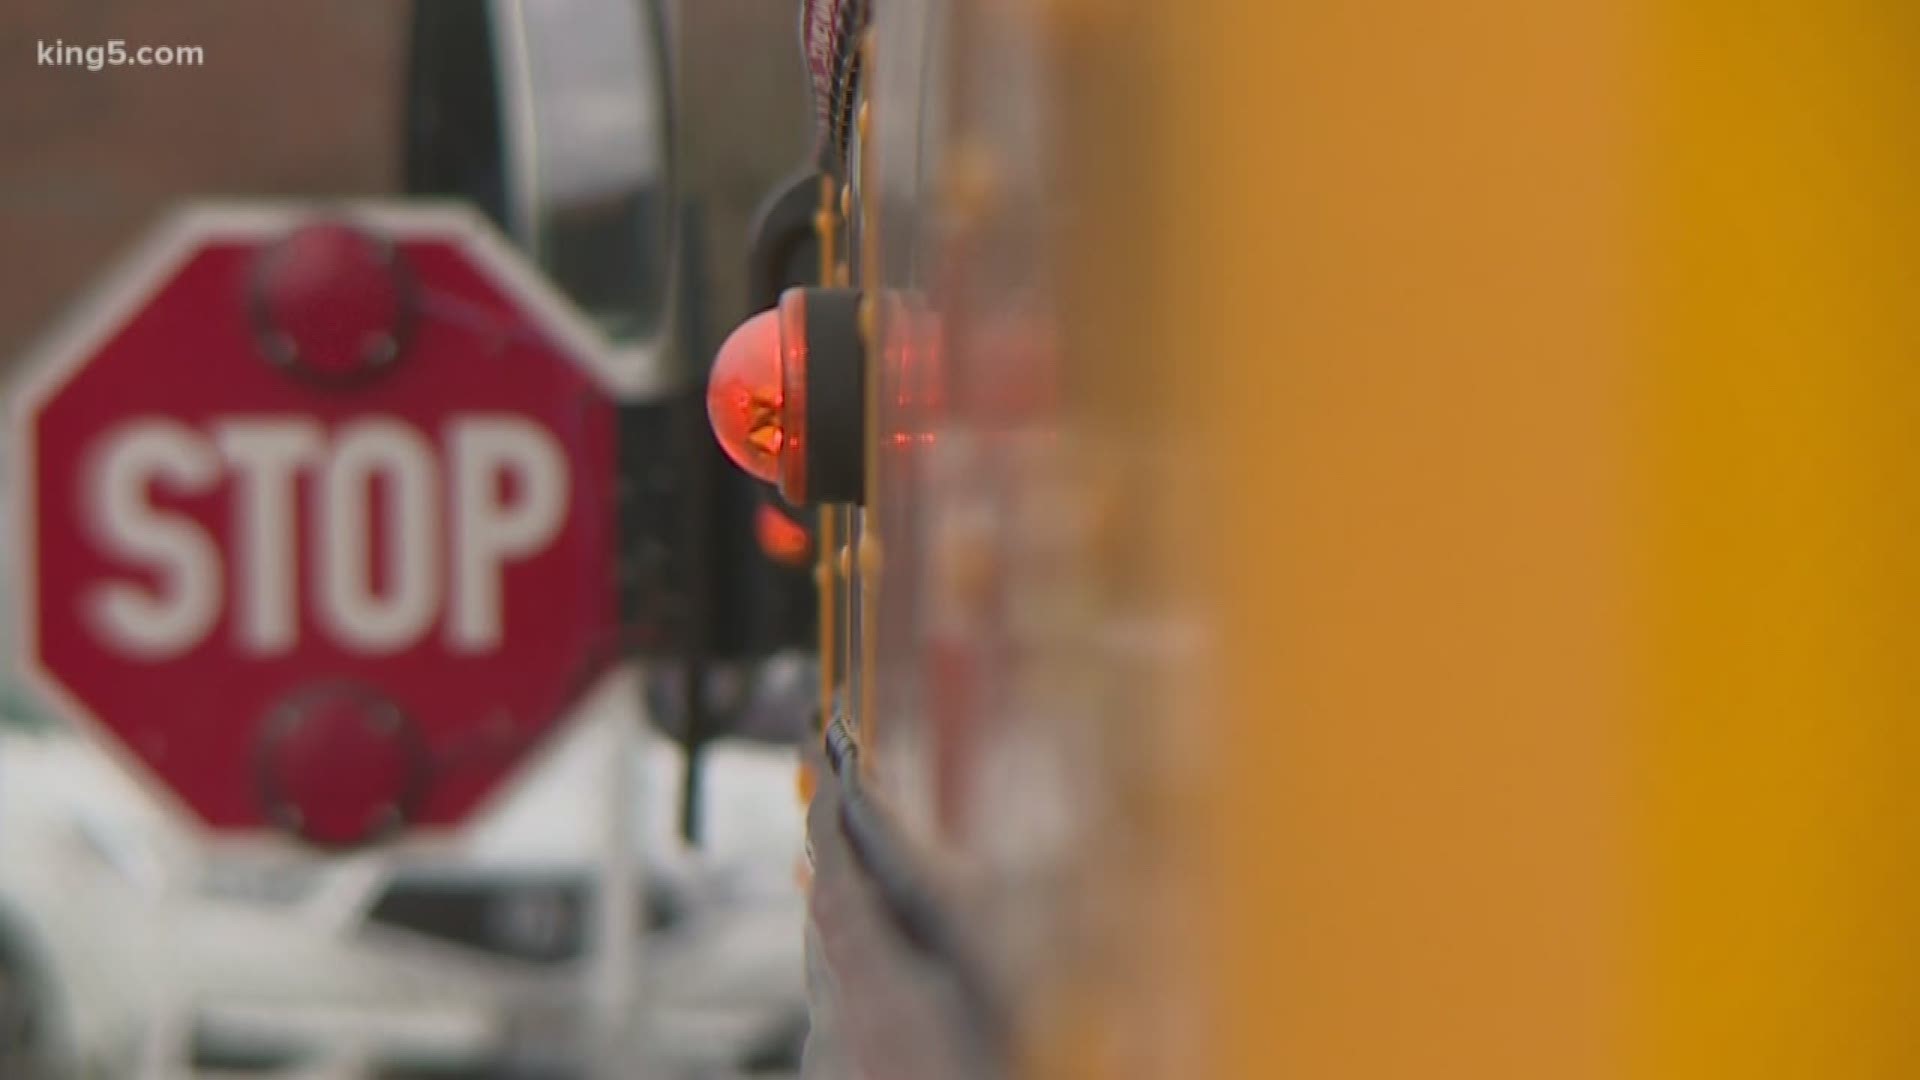 Back in September, we told you that the Bellevue School District would be installing paddle cameras on some of its school buses to catch drivers failing to yield to buses. The numbers are back from the first month of enforcement and they may surprise you. KING 5's Vanessa Misciagna has more.